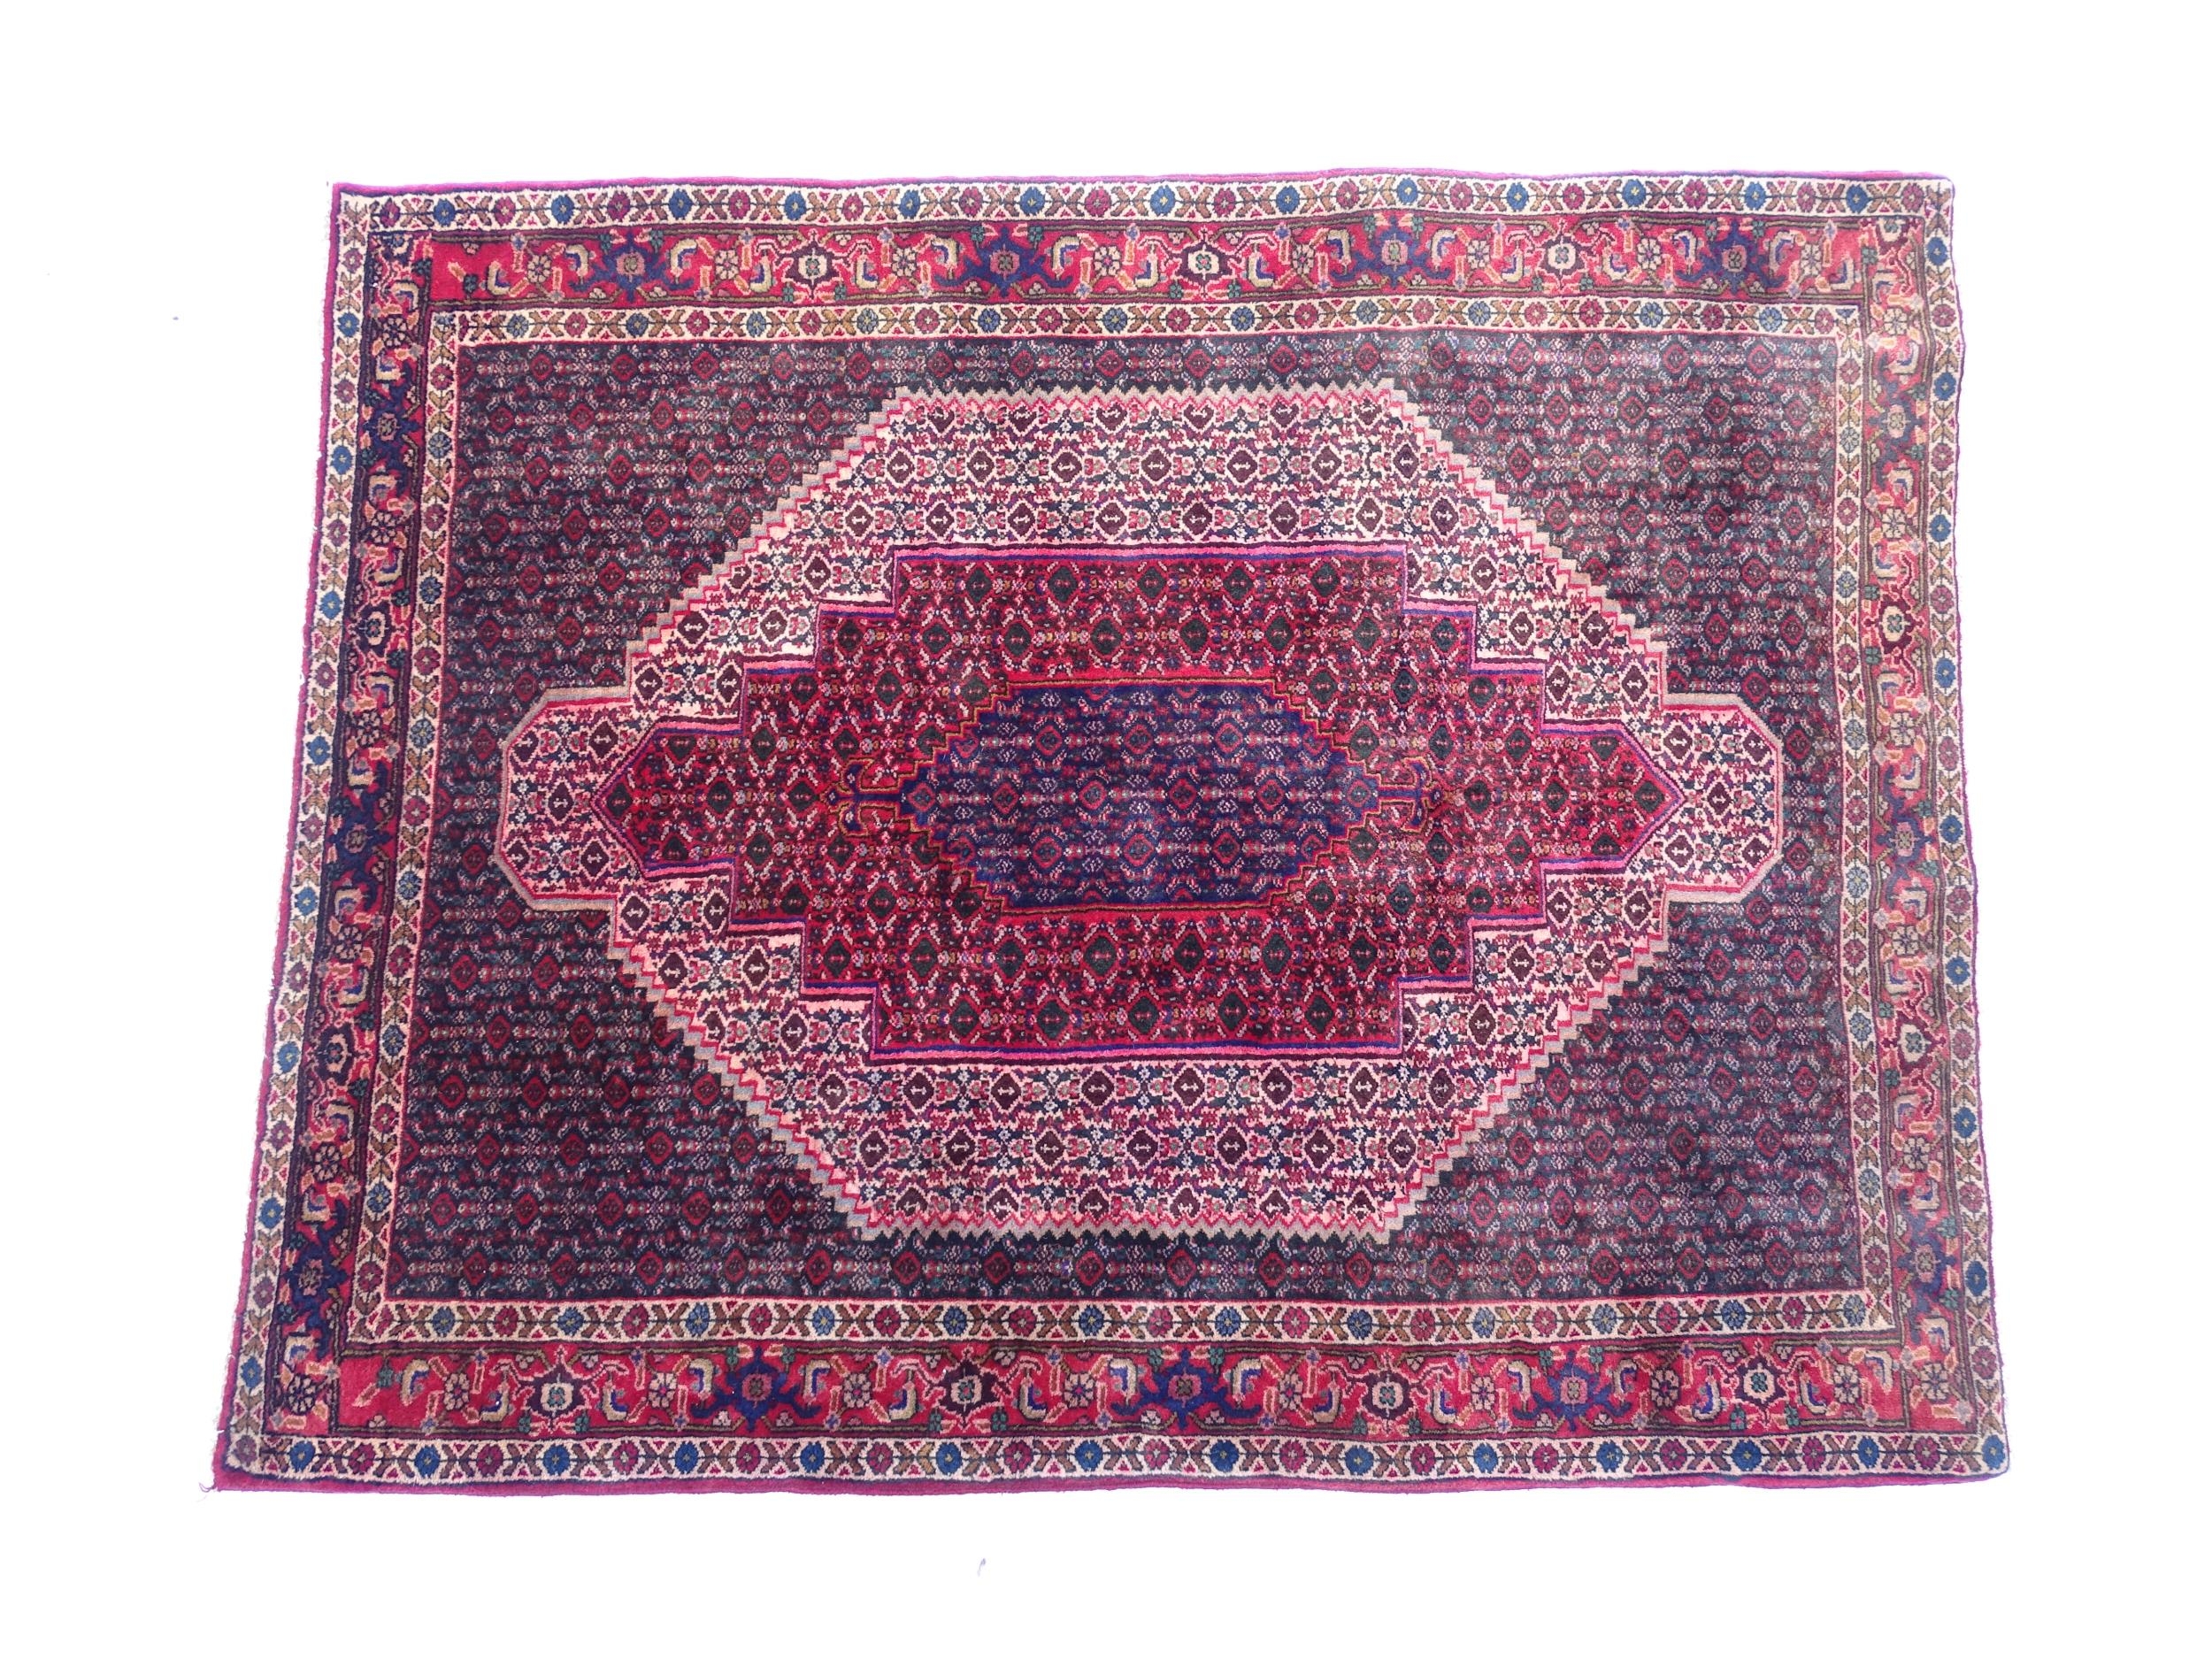 Carpet / Rug: A North West Persian Senneh rug, the red, blue and cream grounds decorated with